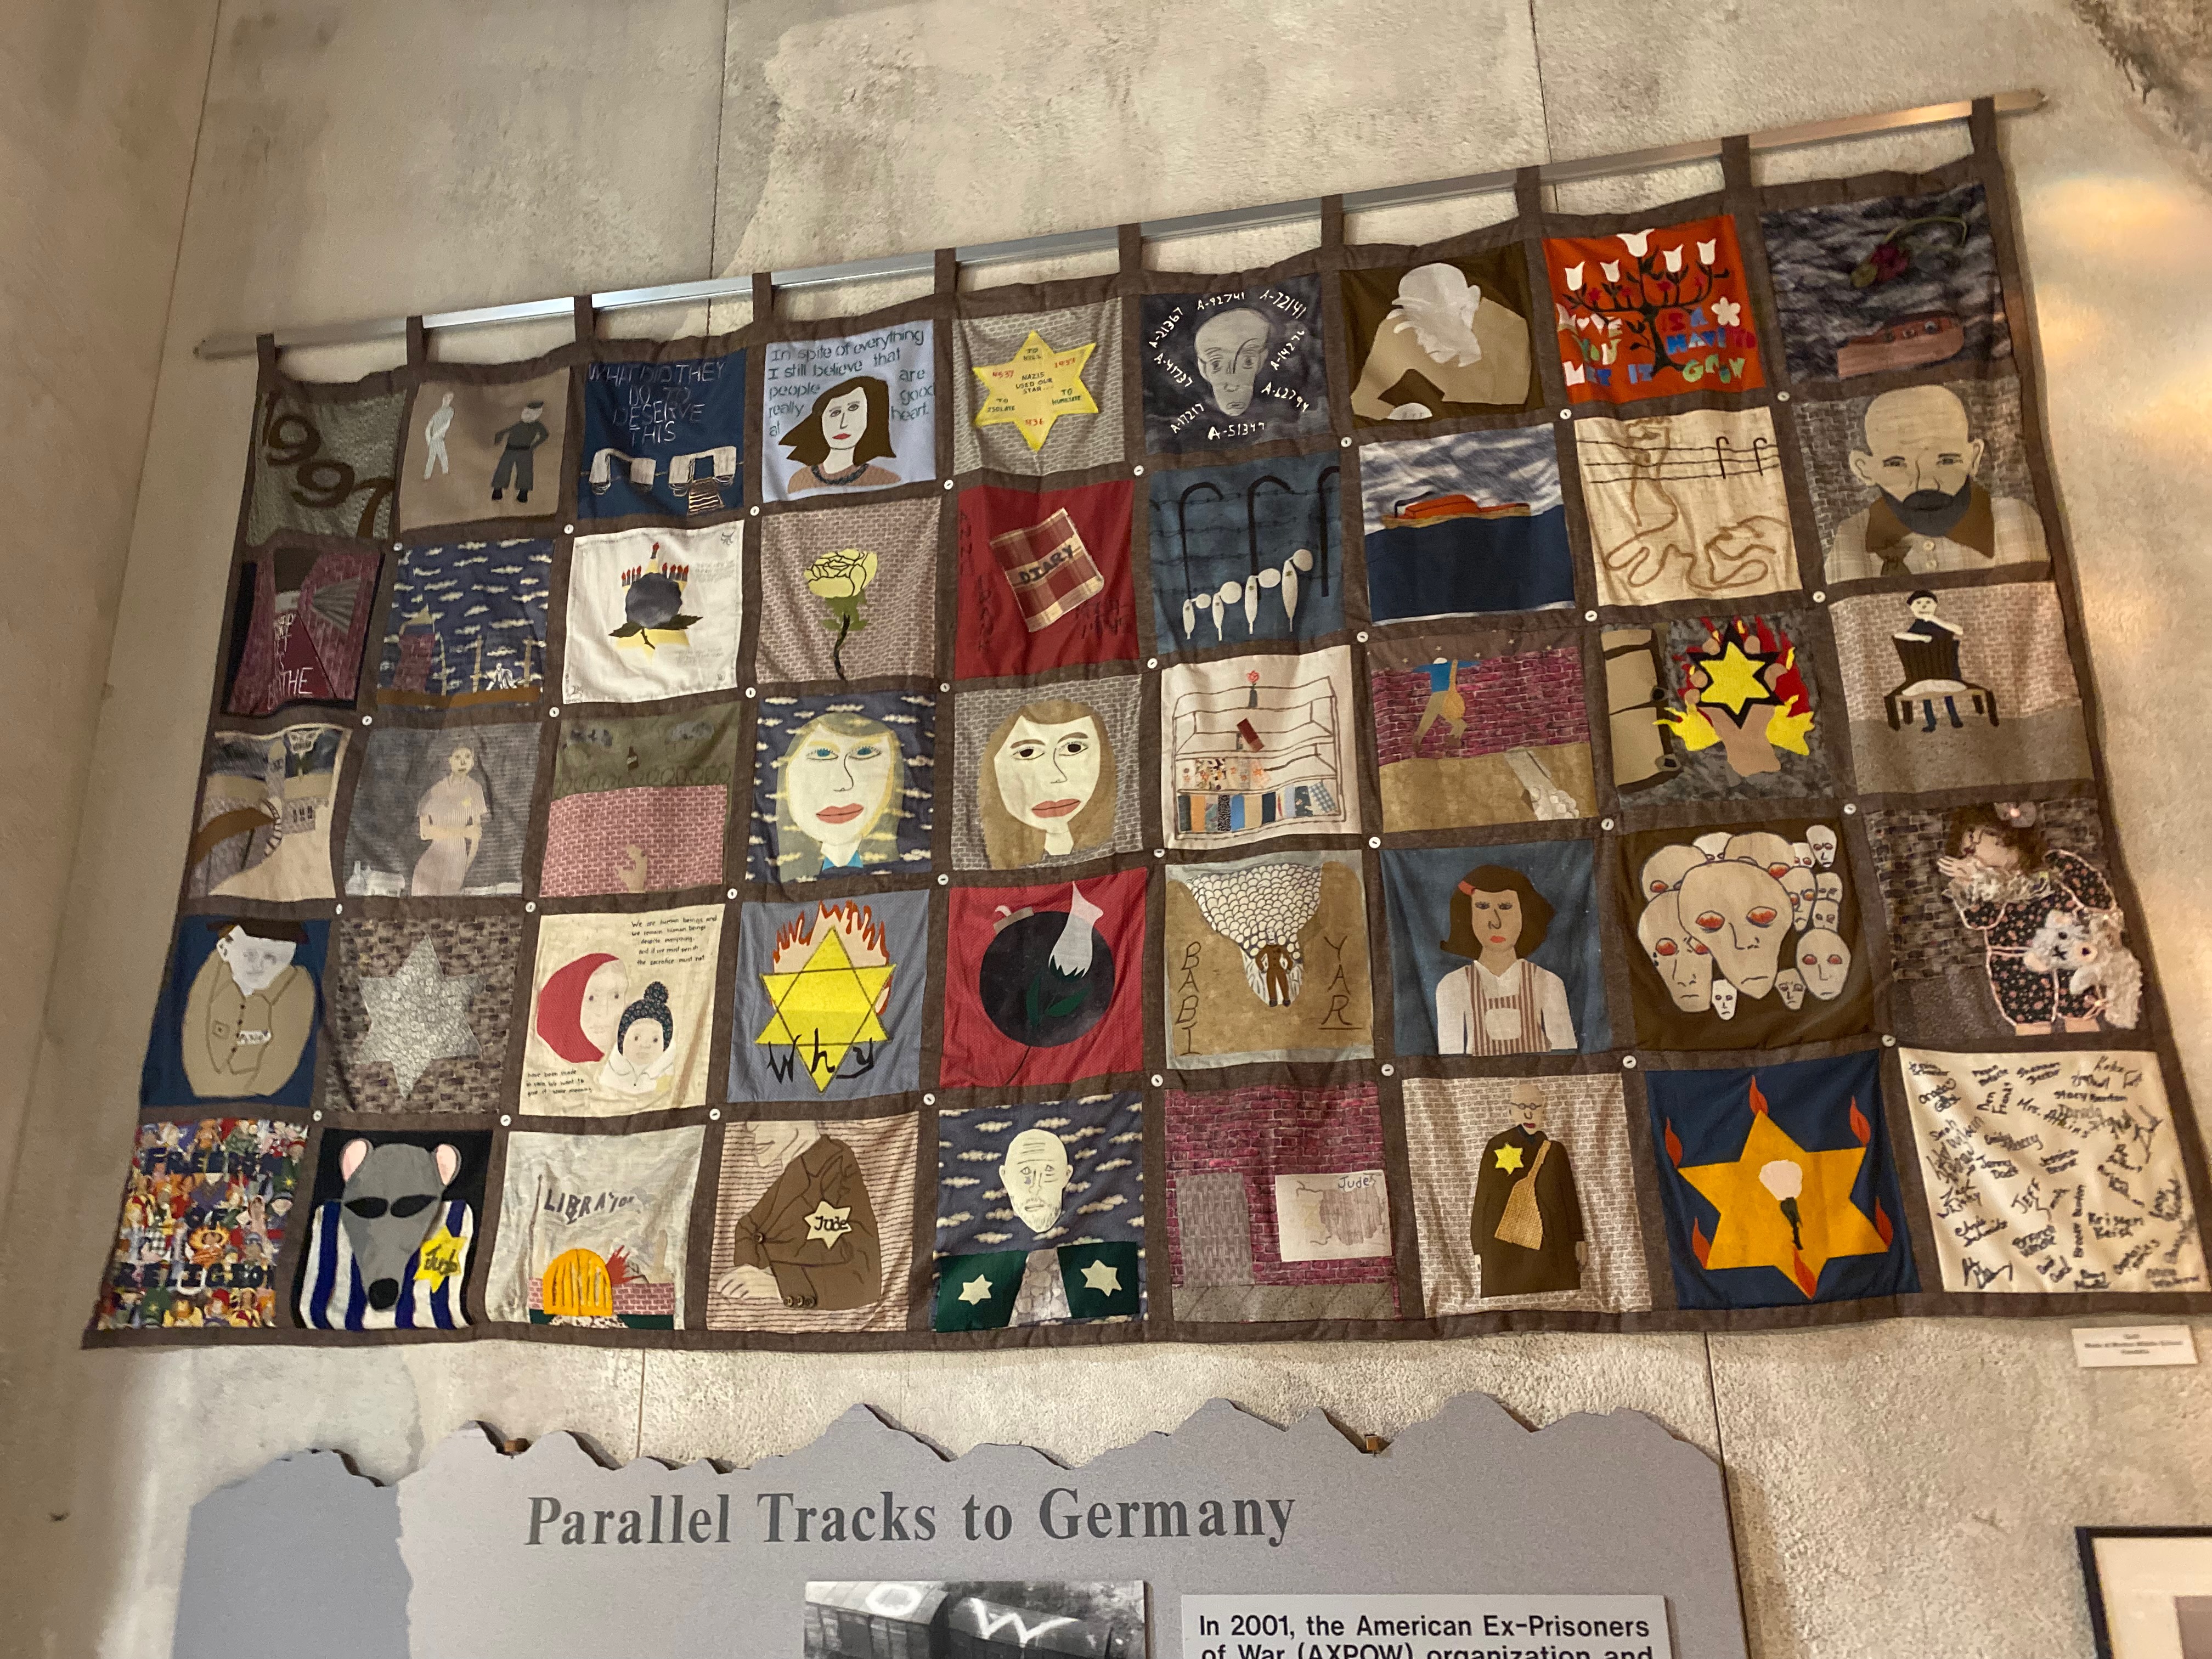 National Air Force Museum - Holocaust Memorial Quilt - Made at Morton Middle School Vandalia Ohio - Image - Quilts that document our history - Quiltblox.com